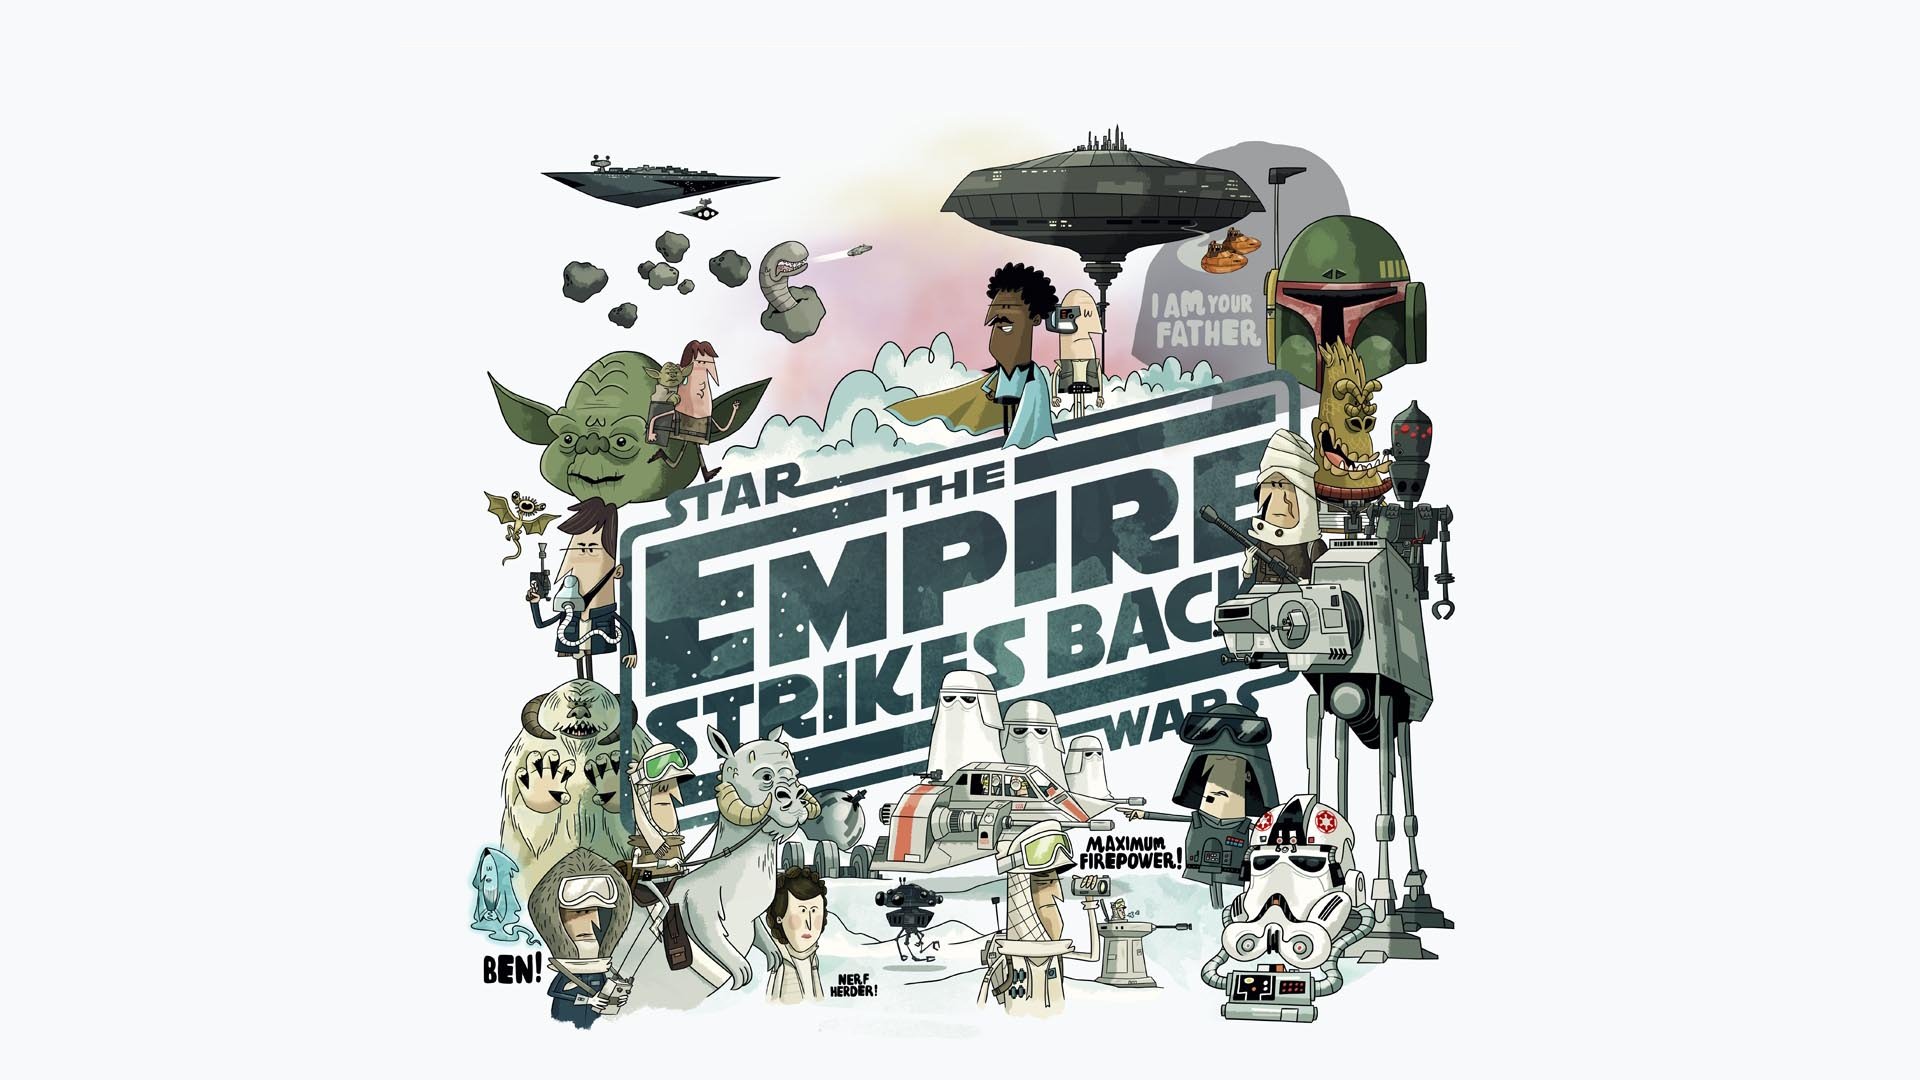 Star Wars Episode V  The Empire Strikes Back by Phil Shelly  Home of the  Alternative Movie Poster AMP